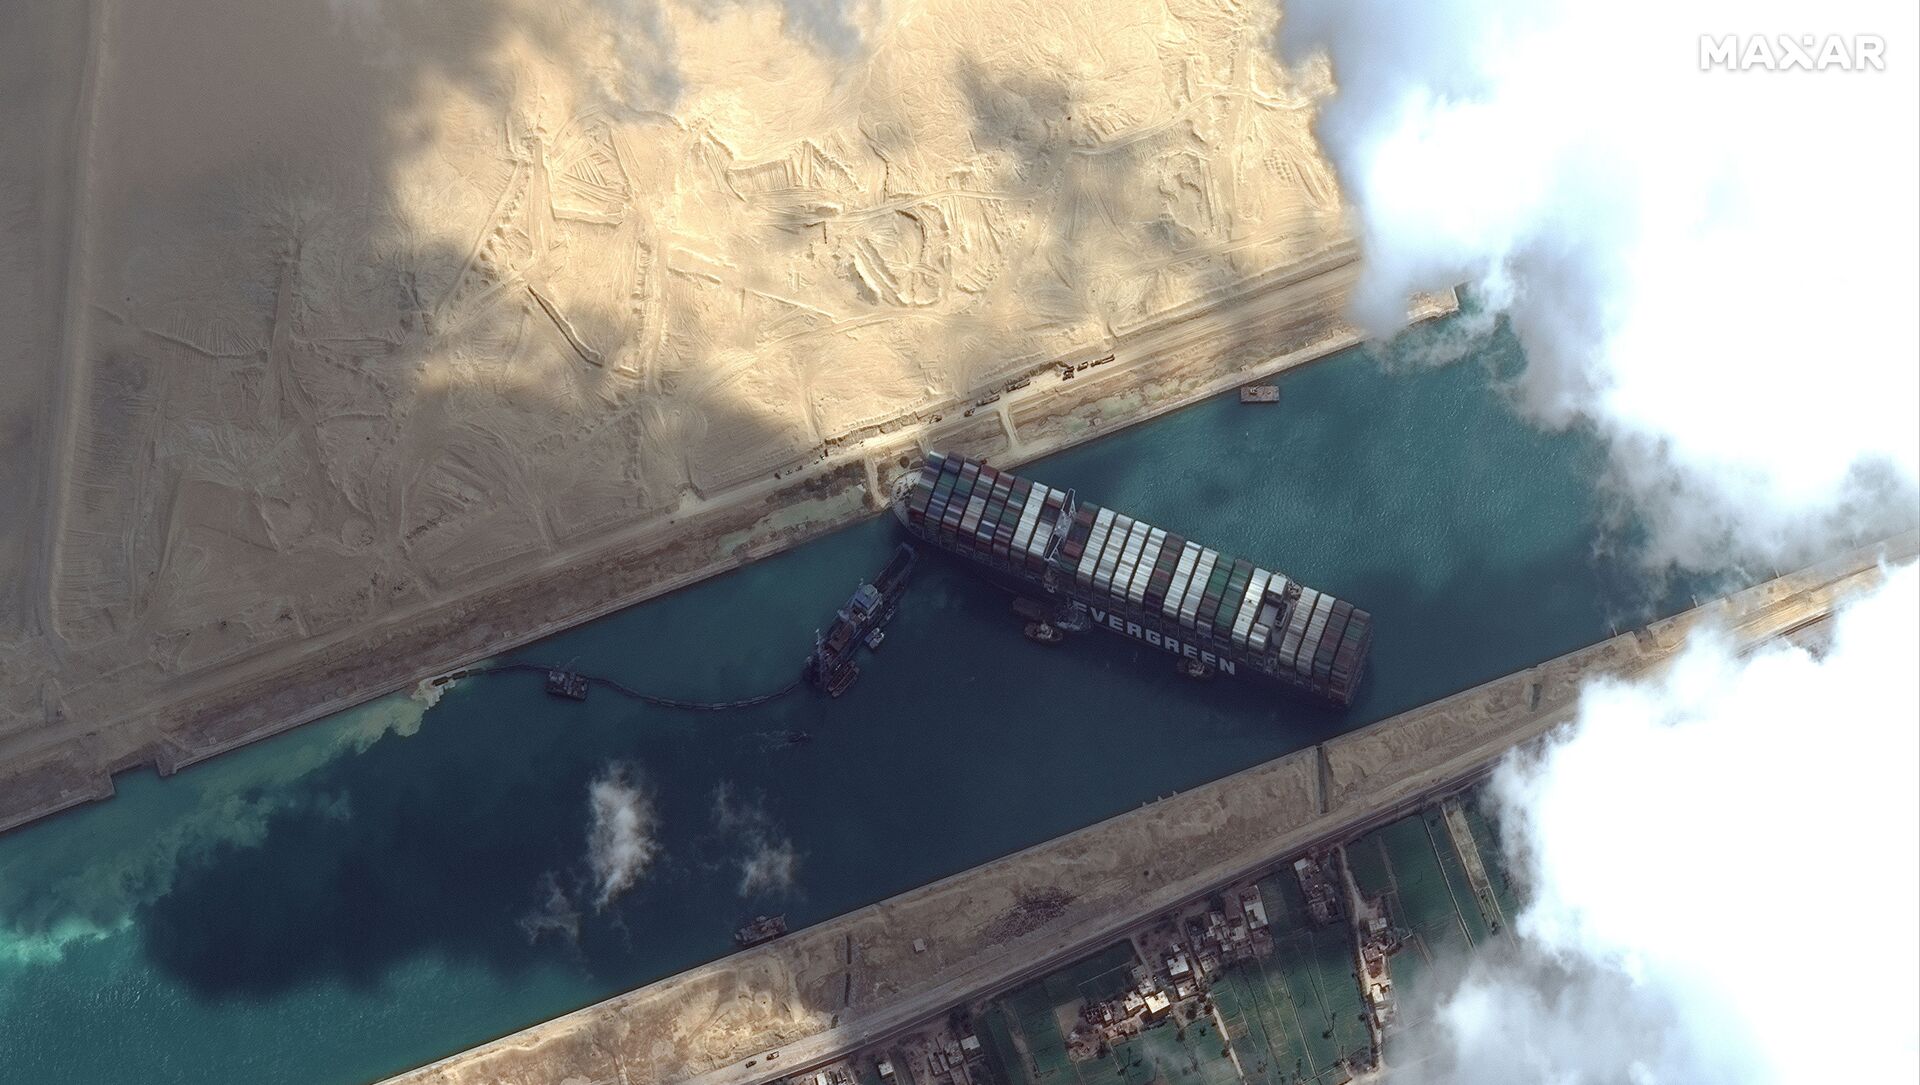 The Ever Given container ship is pictured in the Suez Canal in this Maxar Technologies satellite image, taken on 26 March 2021 - Sputnik Moldova-România, 1920, 29.03.2021